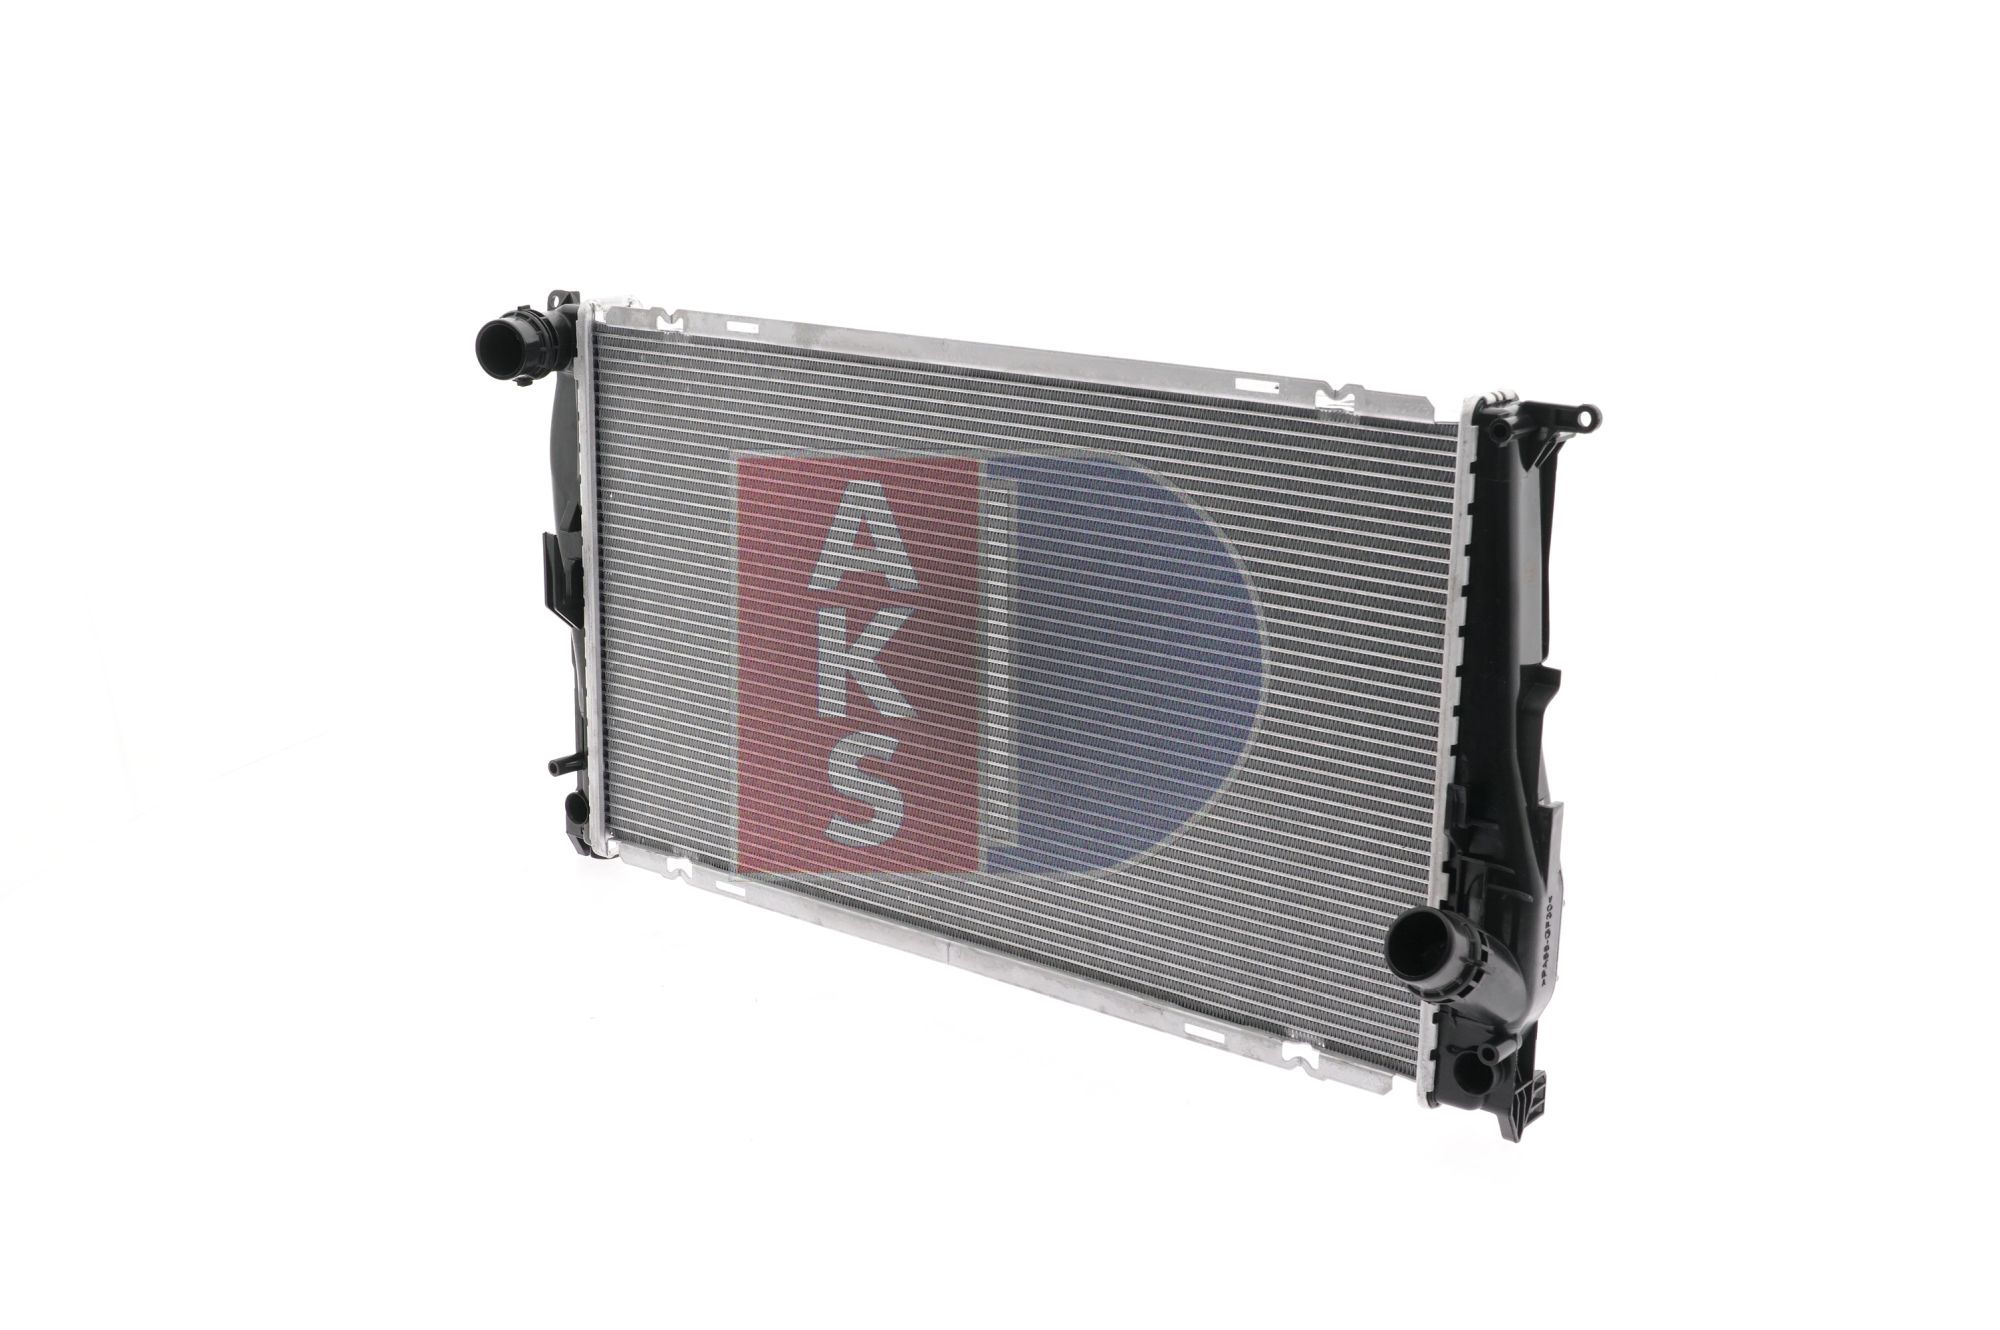 AKS DASIS 050081N Engine radiator for vehicles with/without air conditioning, 600 x 336 x 32 mm, Automatic Transmission, Brazed cooling fins